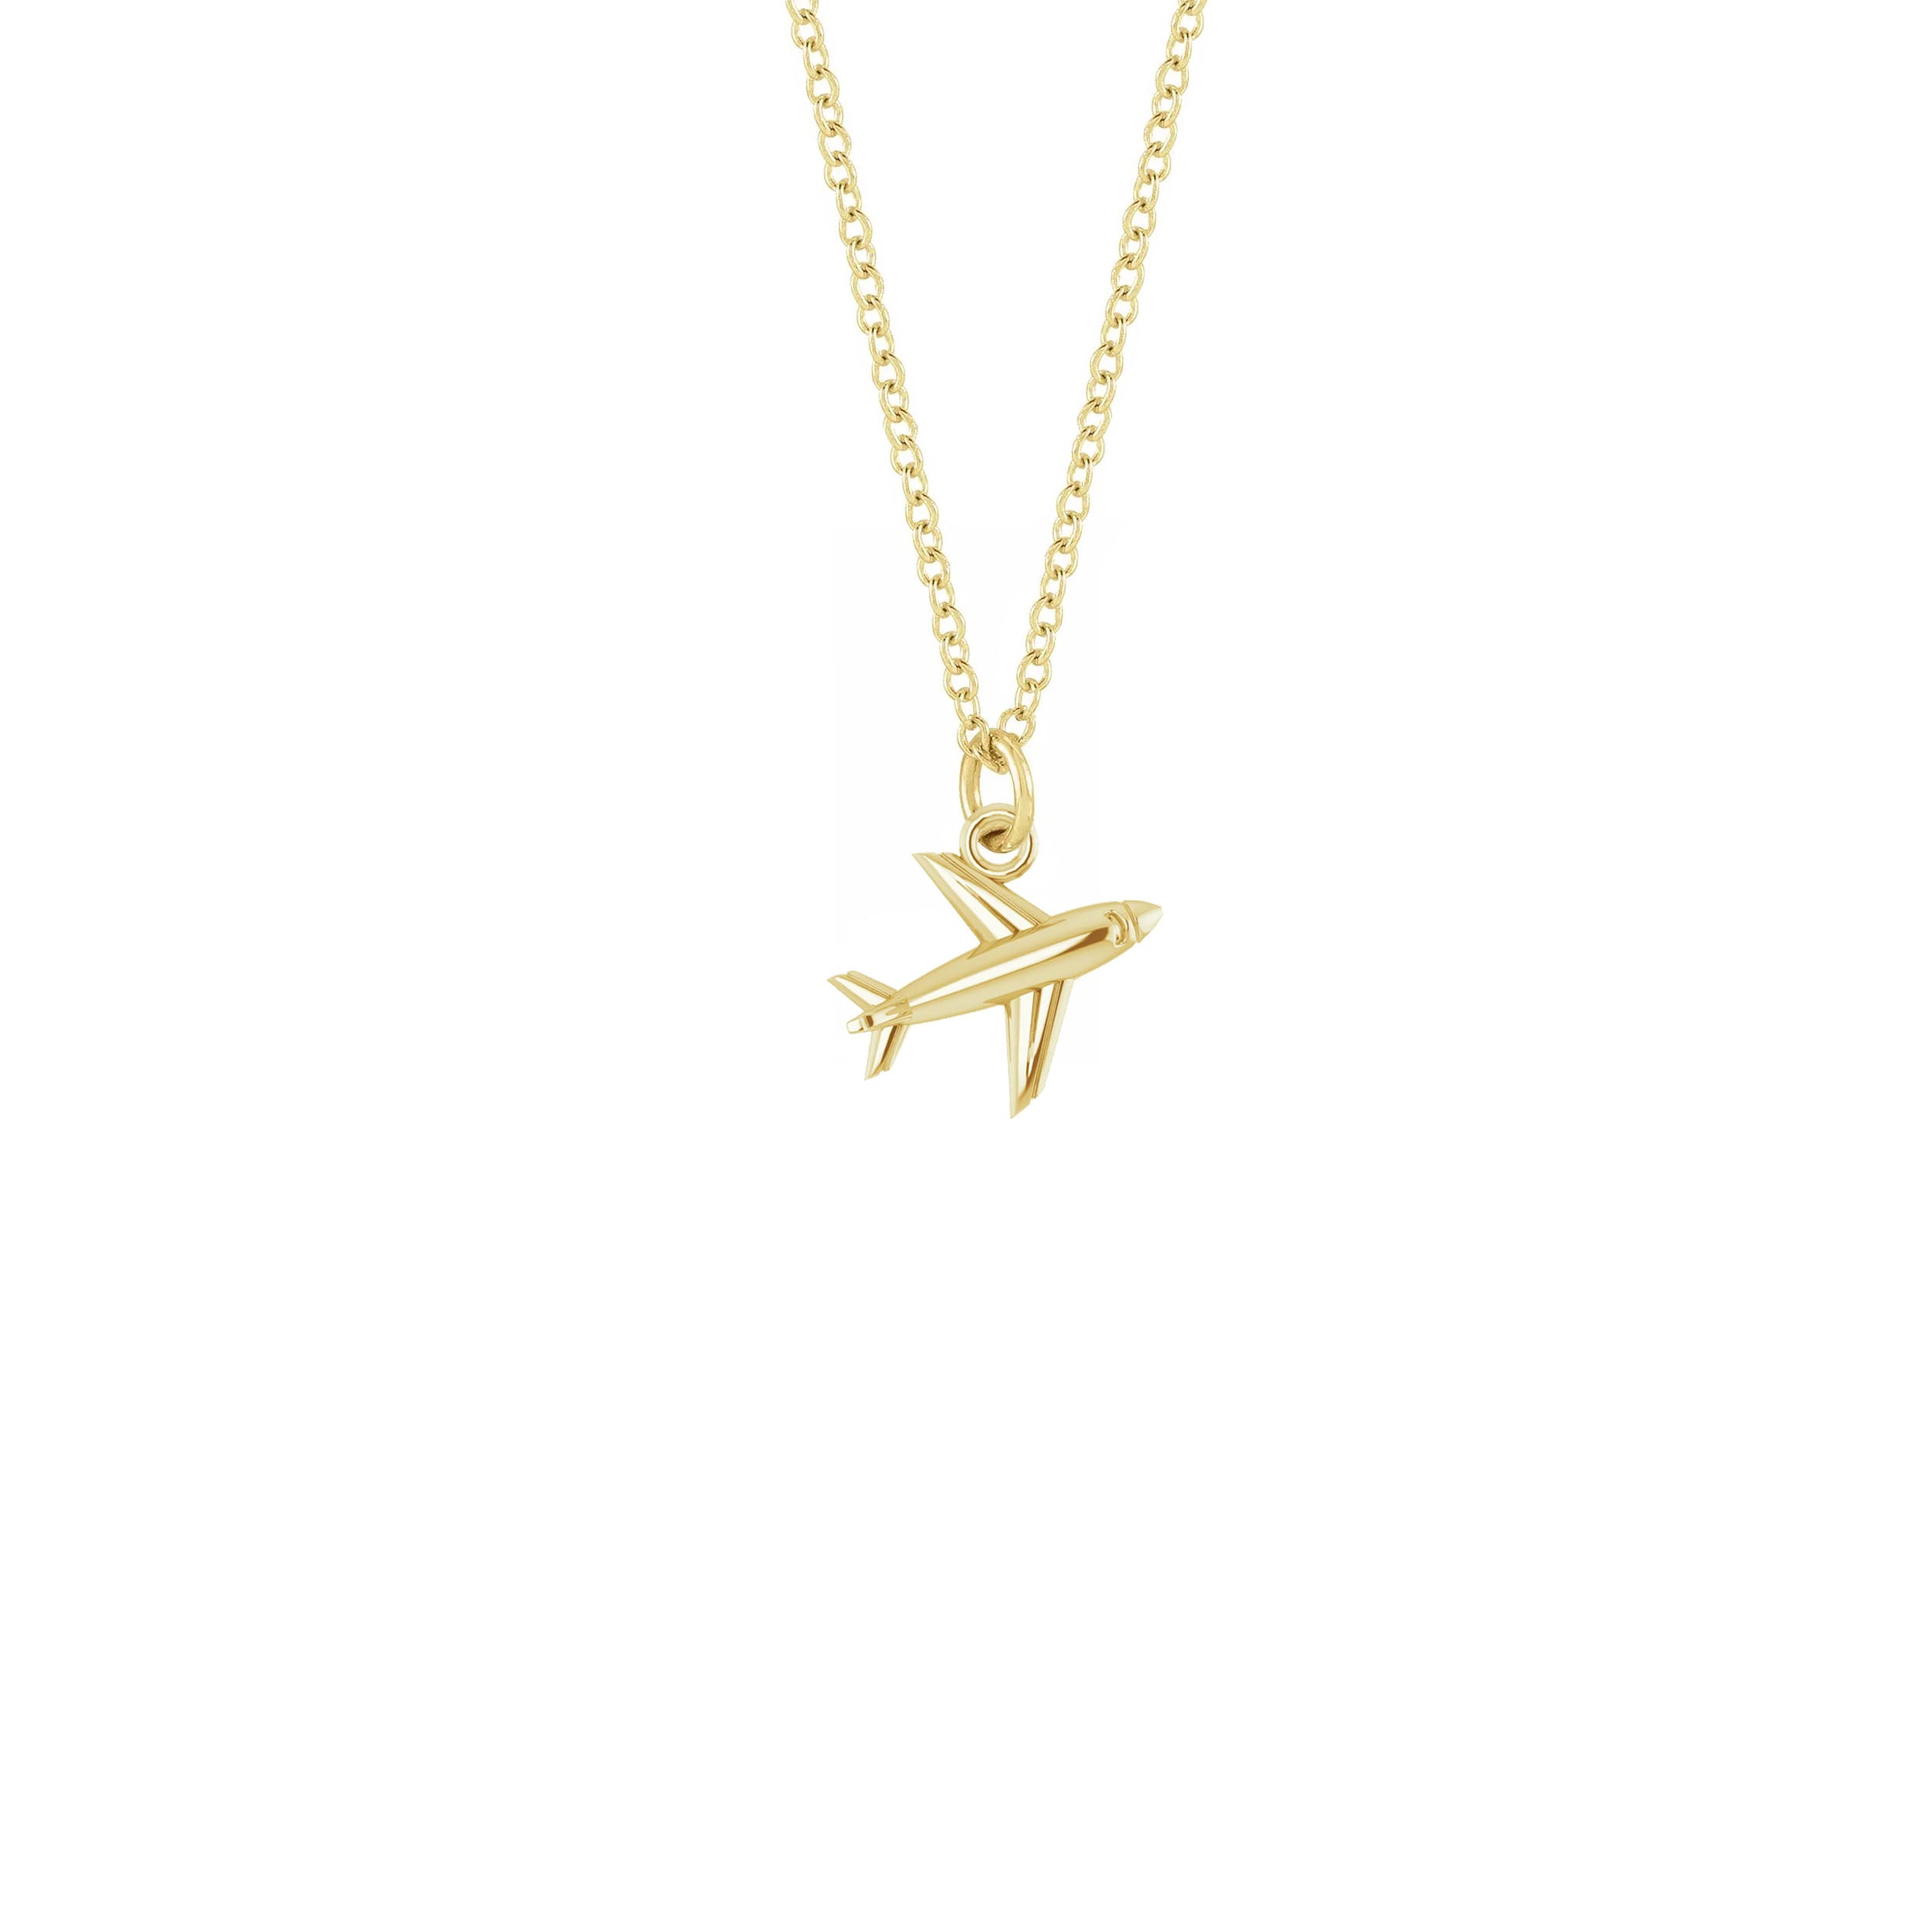 Buy 14K Gold Airplane Necklace, Airplane Pendant, Tiny Airplane Charm,  Dainty Gold Plane Necklace, Travel Jewelry, Pilots Flight Attendant Gift  Online in India - Etsy